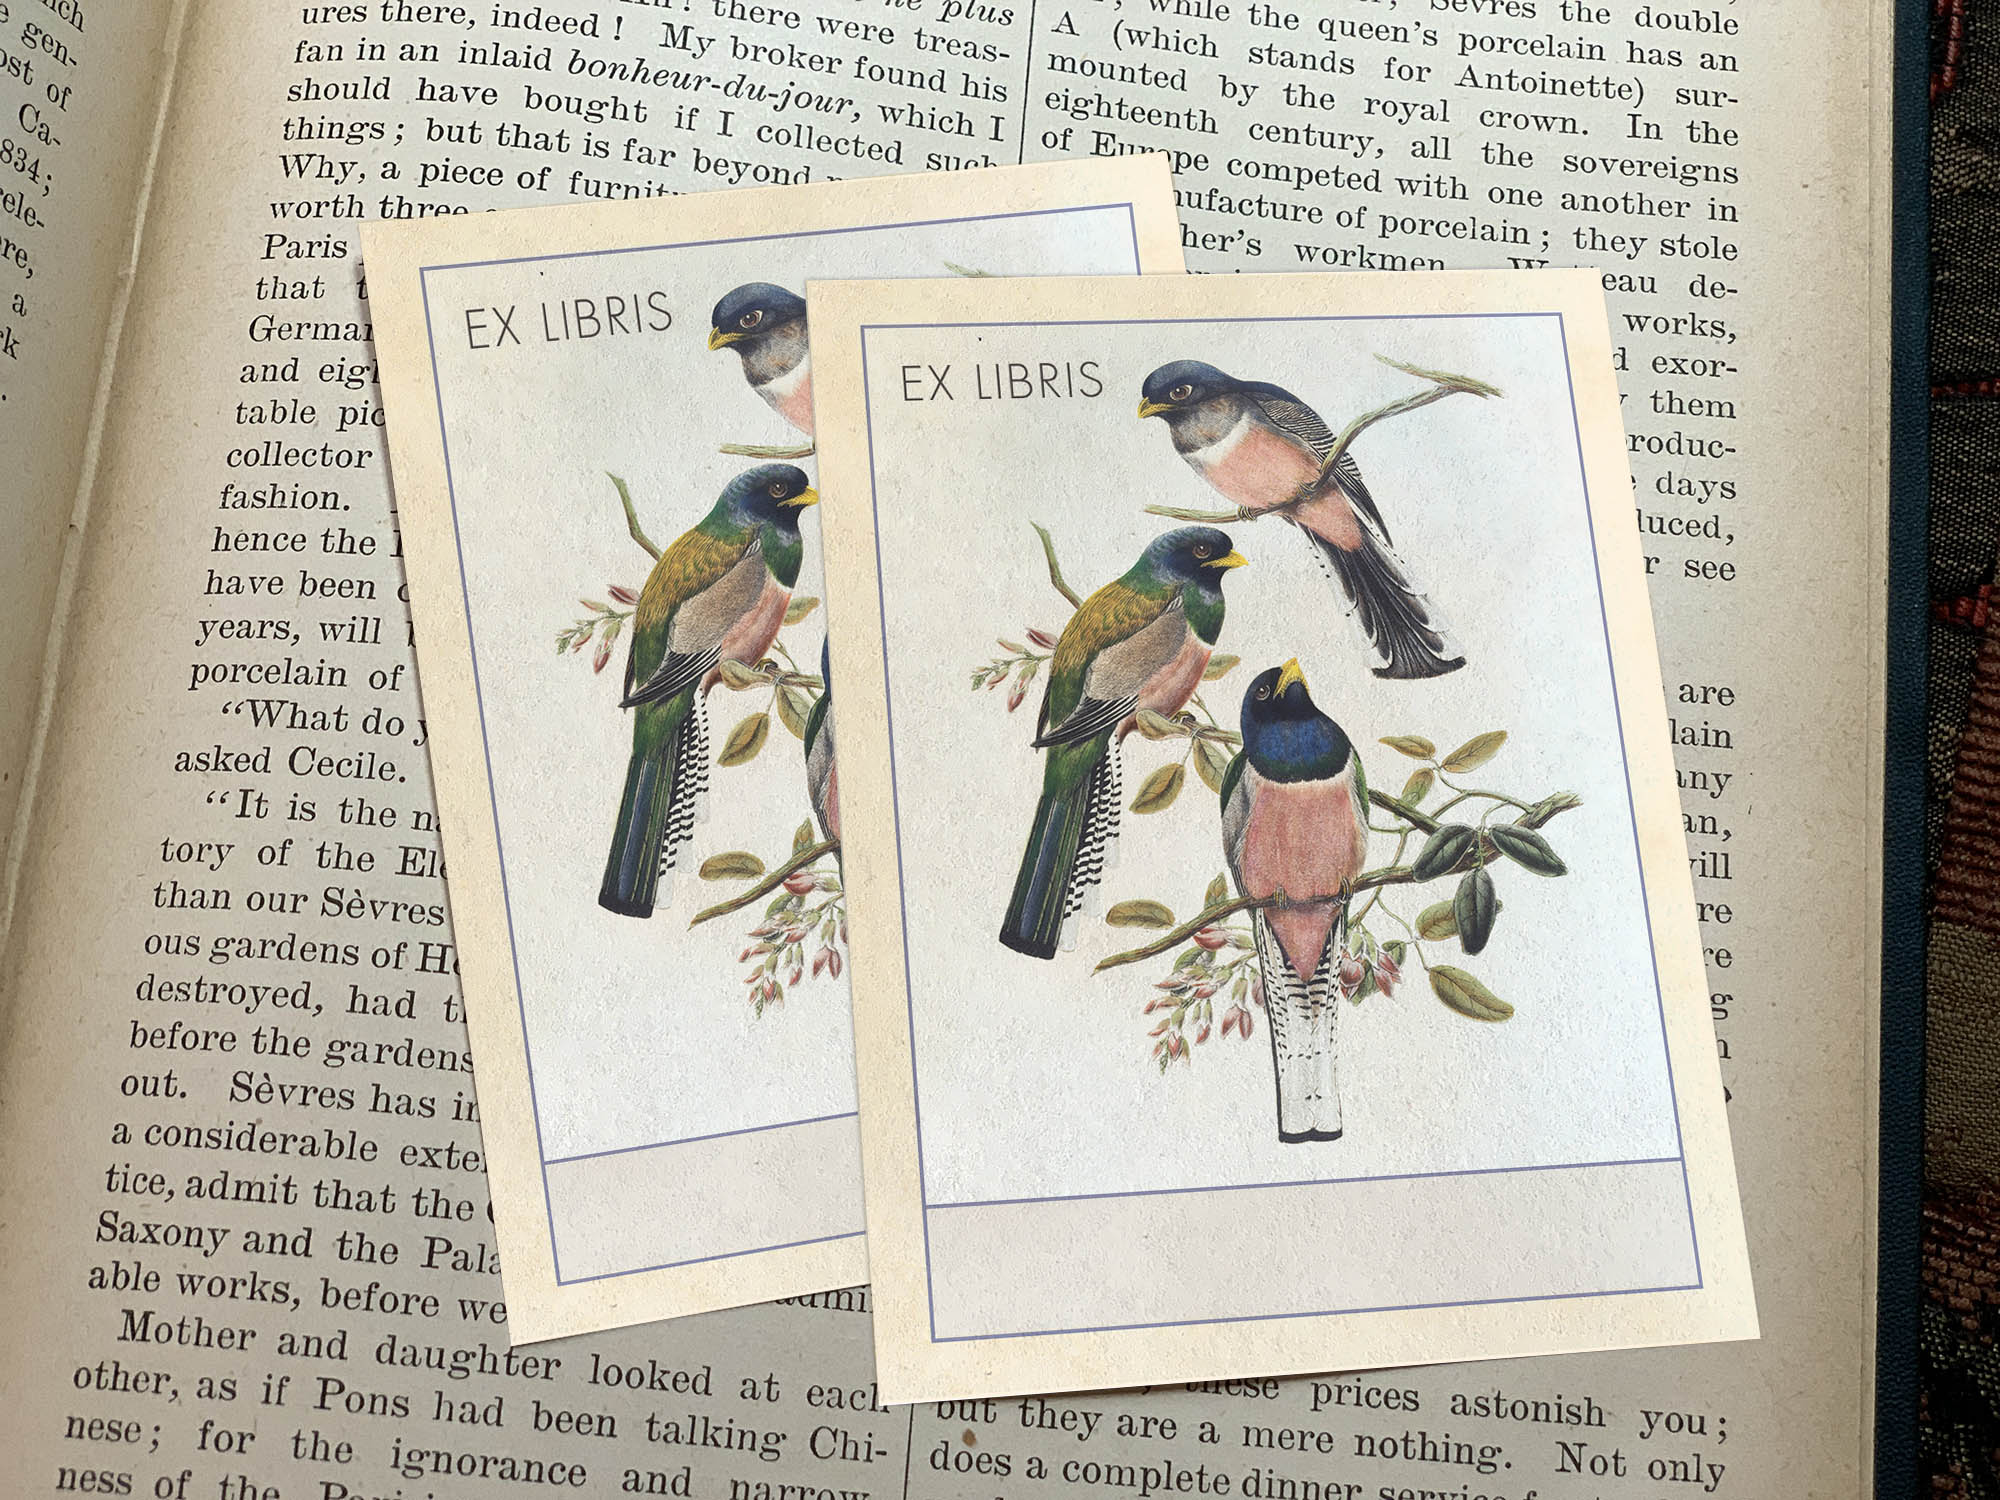 Avian Visions by John Gould, Personalized, Bird Ex Libris Bookplates, Crafted on Traditional Gummed Paper, 32 Styles, 3in x 4in, Set of 30